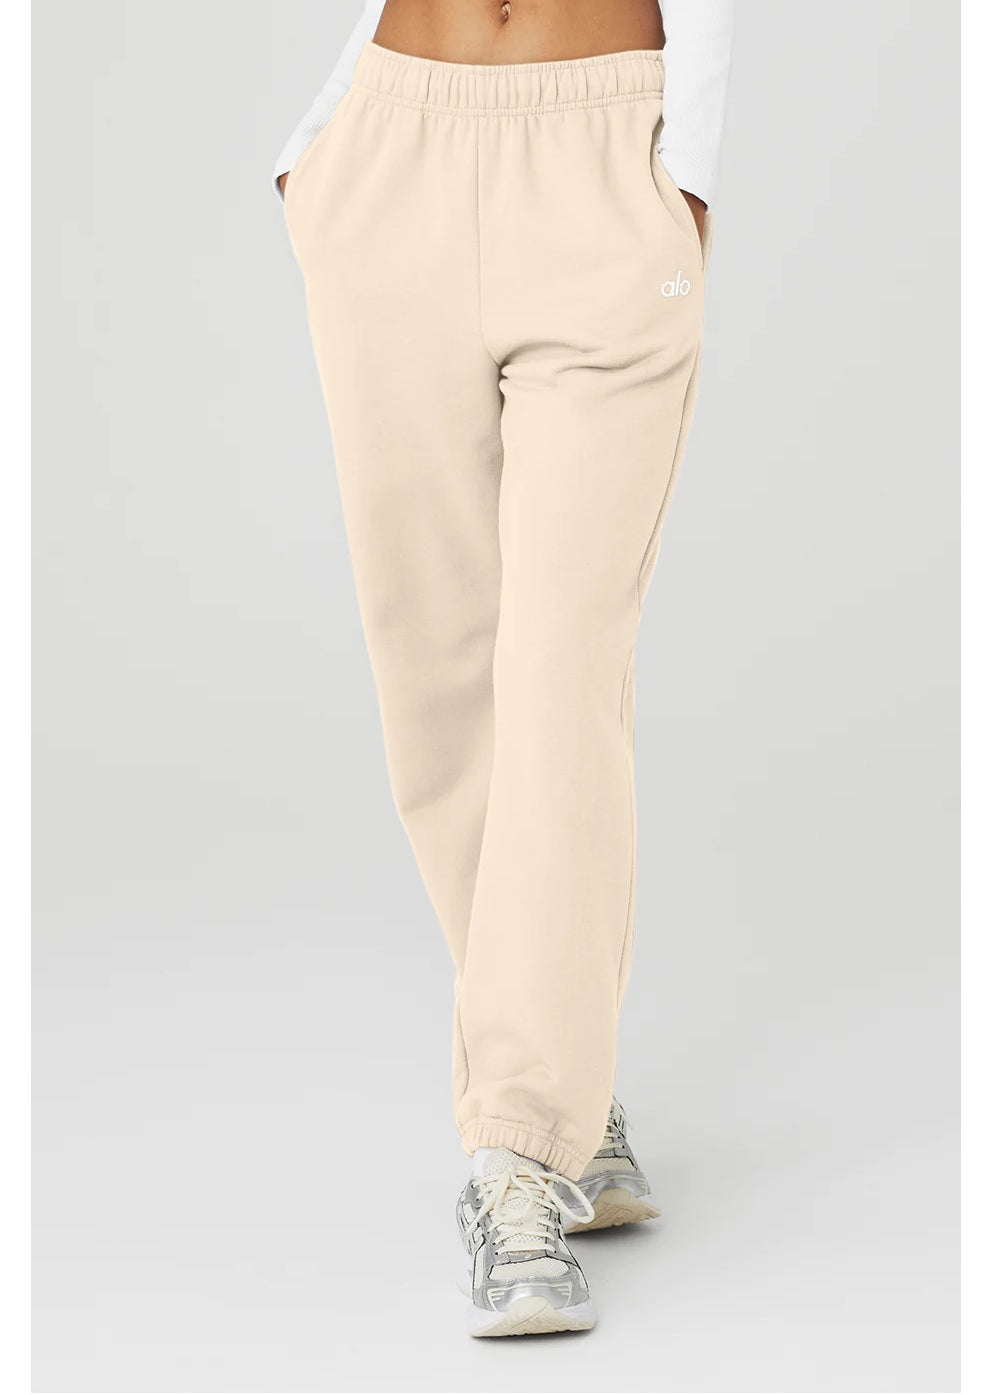 Accolade cotton-blend jersey track pants